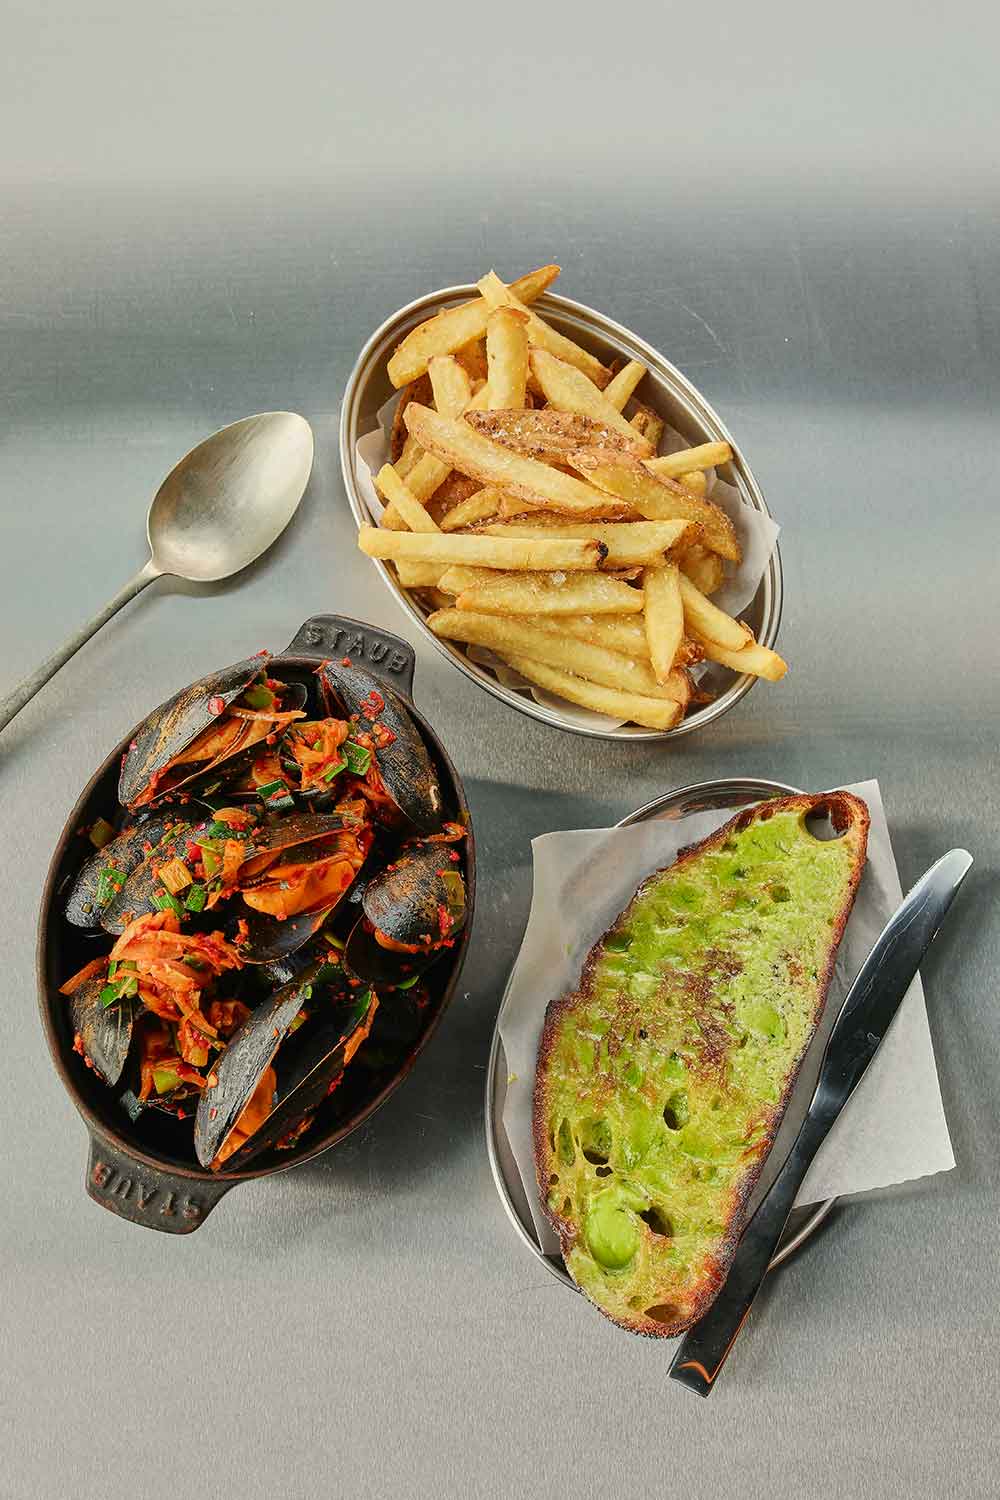 Mussels, chips and french toast at INIS, a new British-Irish eatery in Hackney Wick